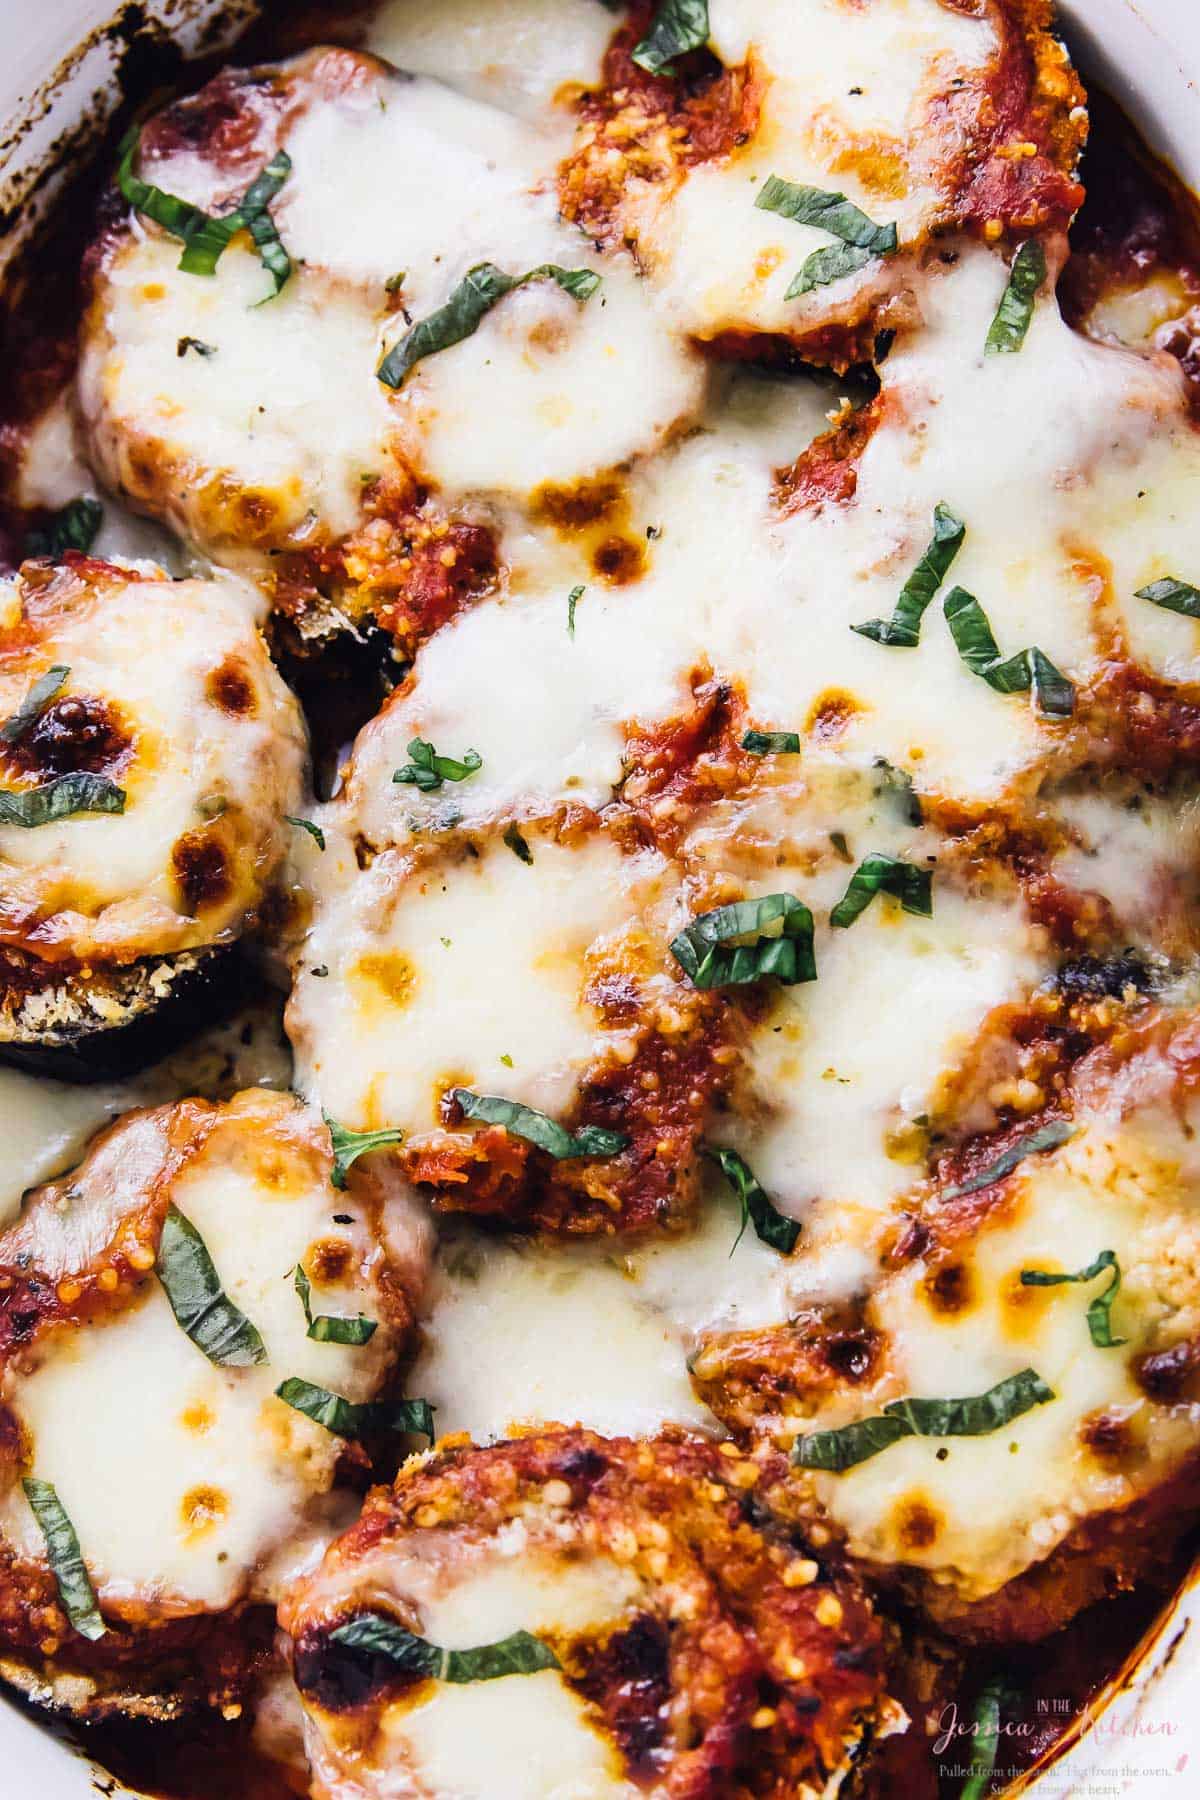 Overhead view of baked eggplant parmesan in casserole dish